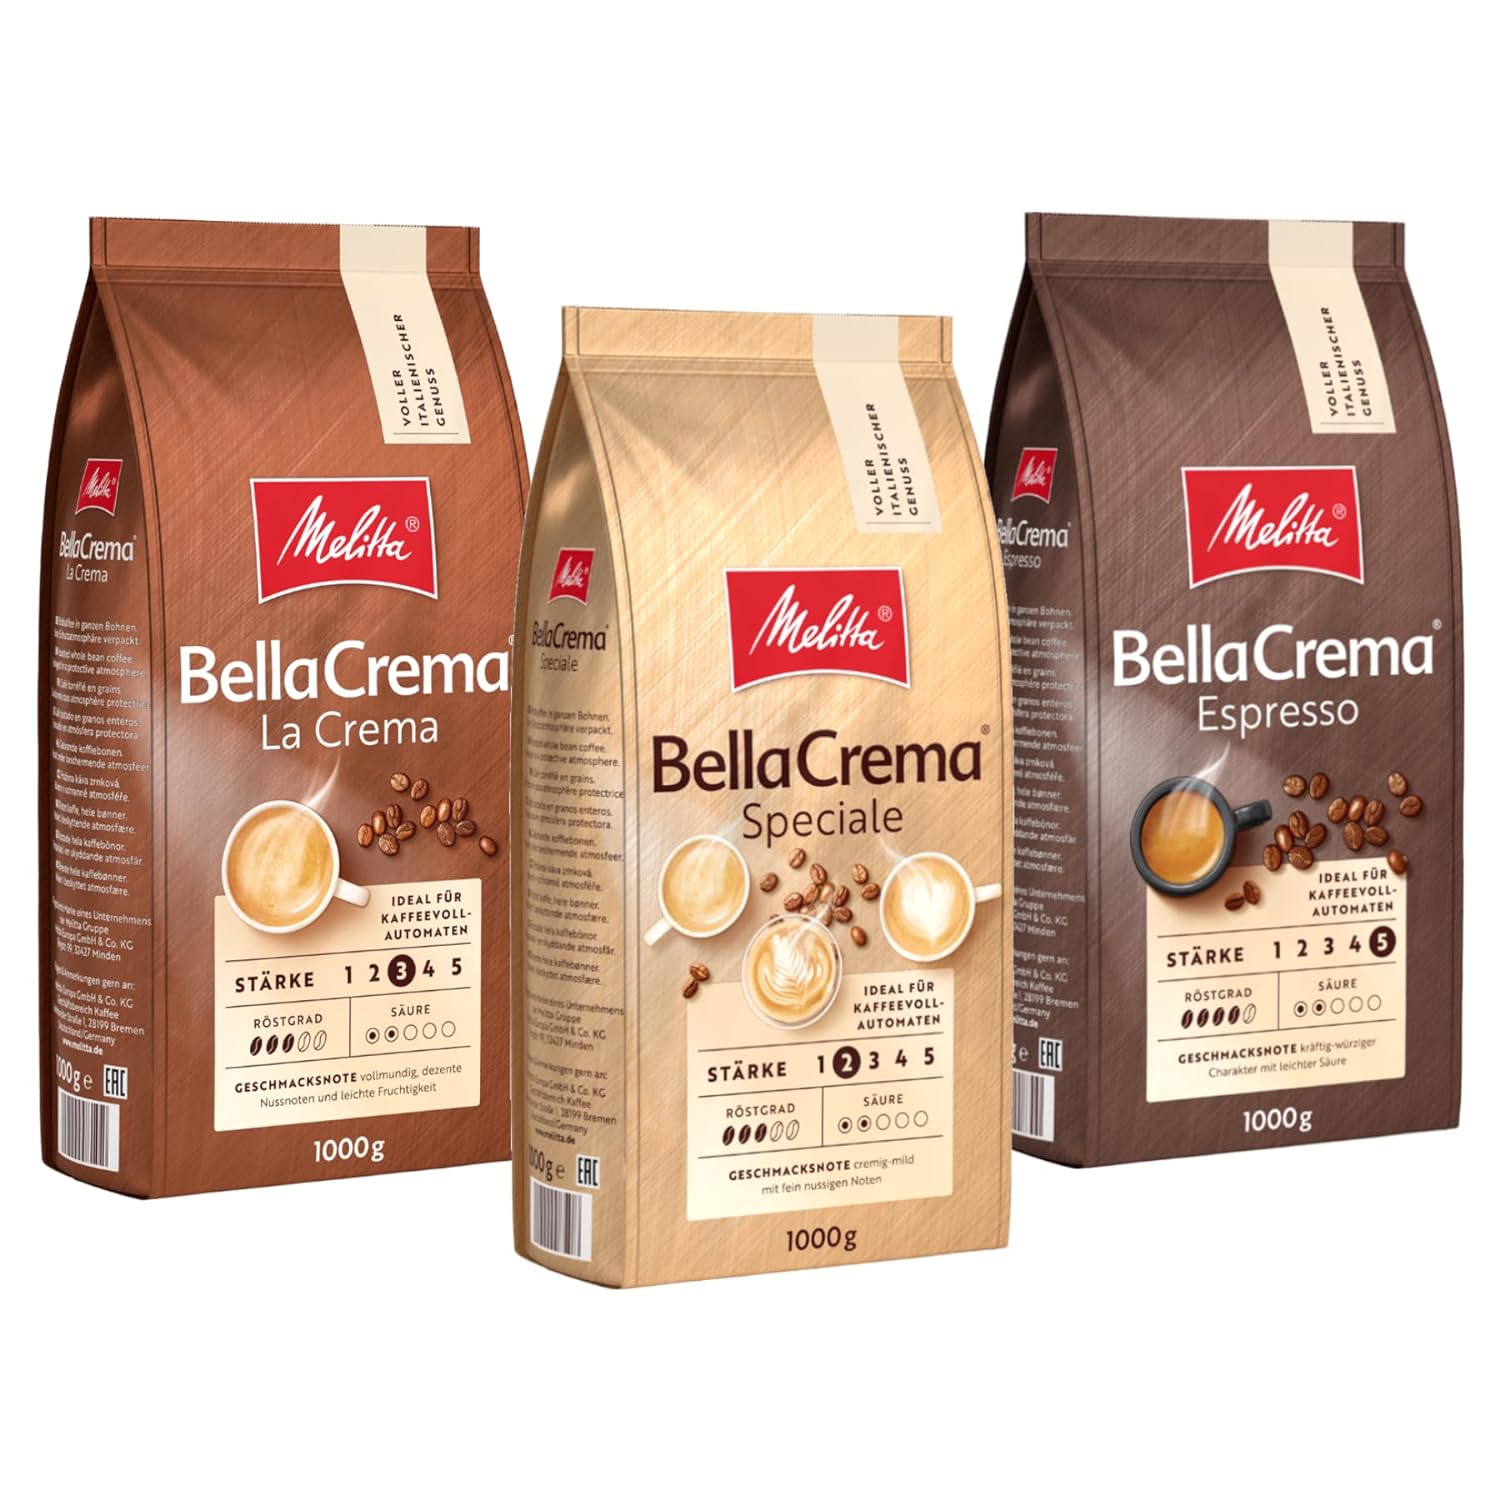 Melitta Bellacrema la Crema Speciale Espresso Whole Coffee Beans 3 x 1 kg, Unground, Coffee Beans for Fully Automatic Coffee Machine, Roasted in Germany